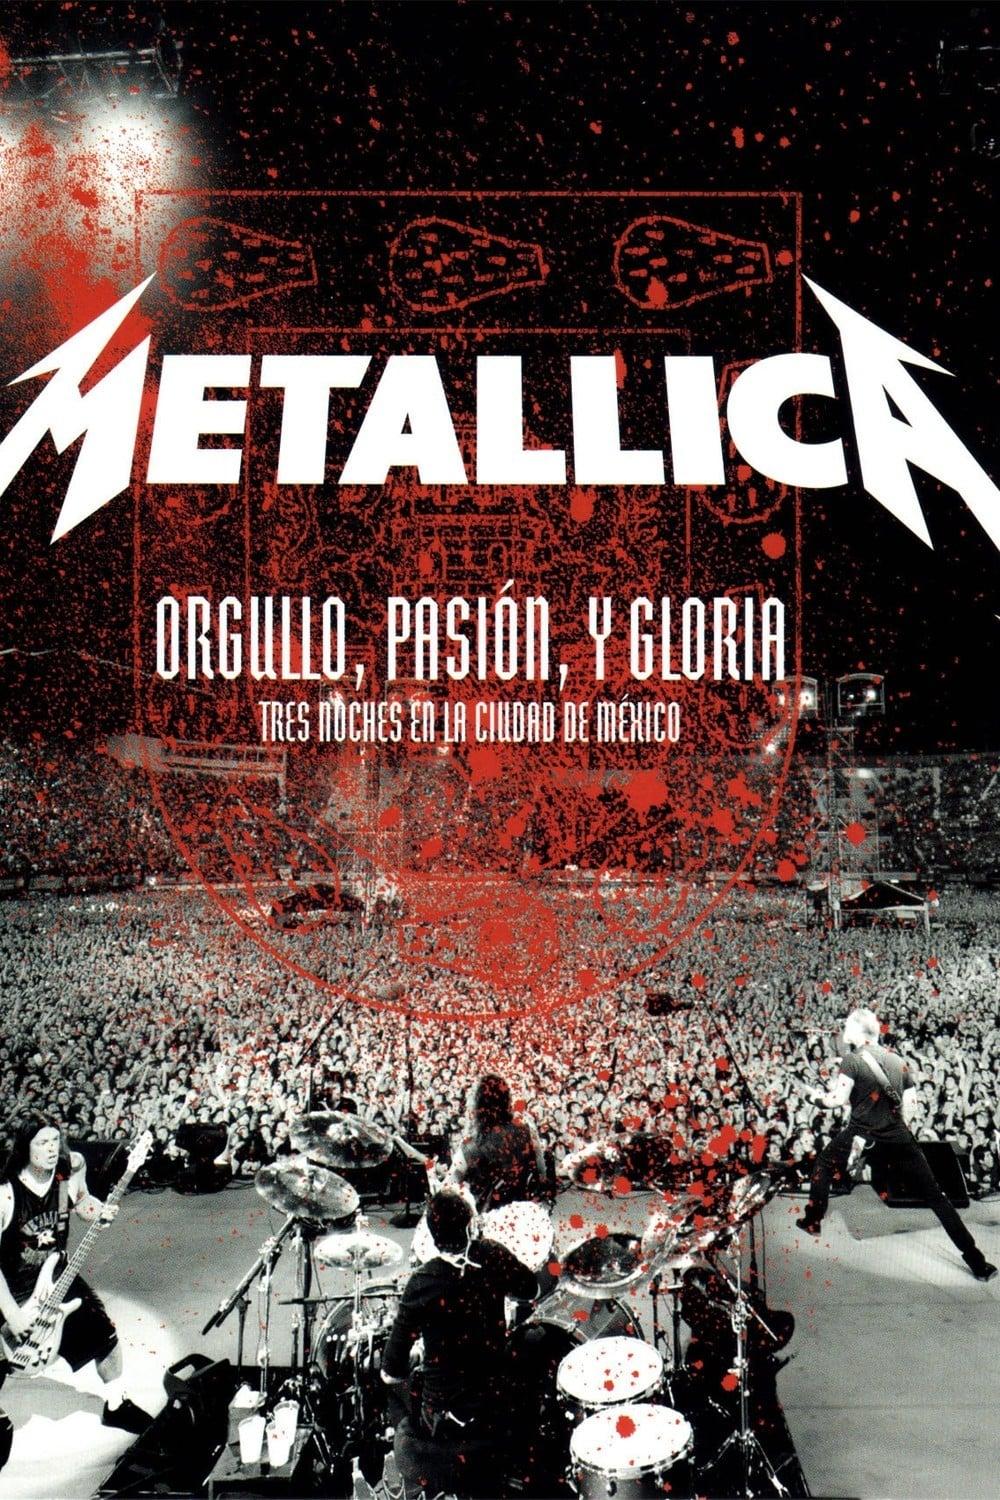 Metallica: Pride, Passion and Glory - Three Nights in Mexico City poster